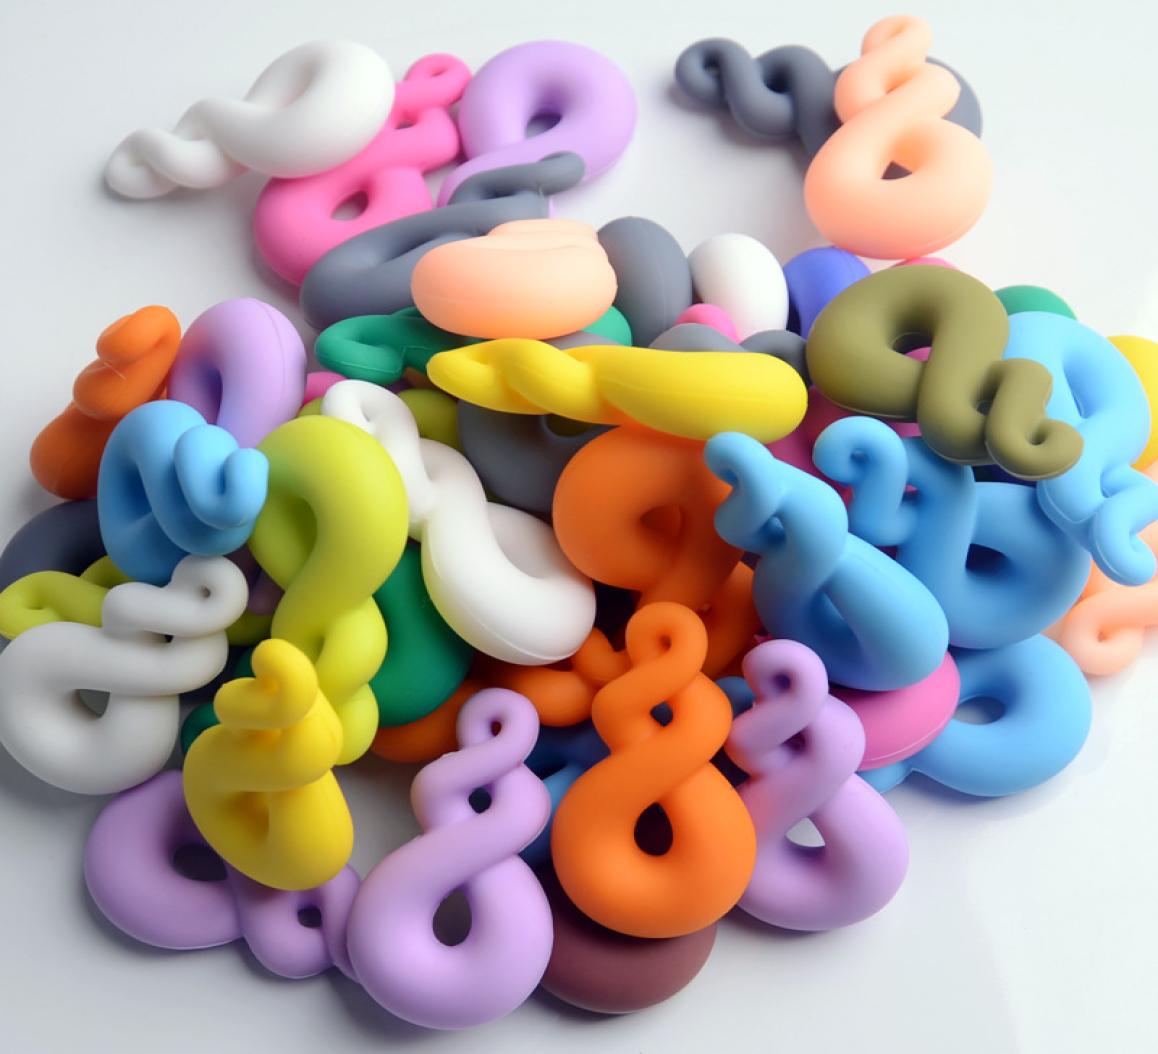 

Silicone Eight Shape Teether Food Grade Silicone Teething Pendant Necklace Baby Chewing Bead Safe Teether Toy Sensory Necklace4447558